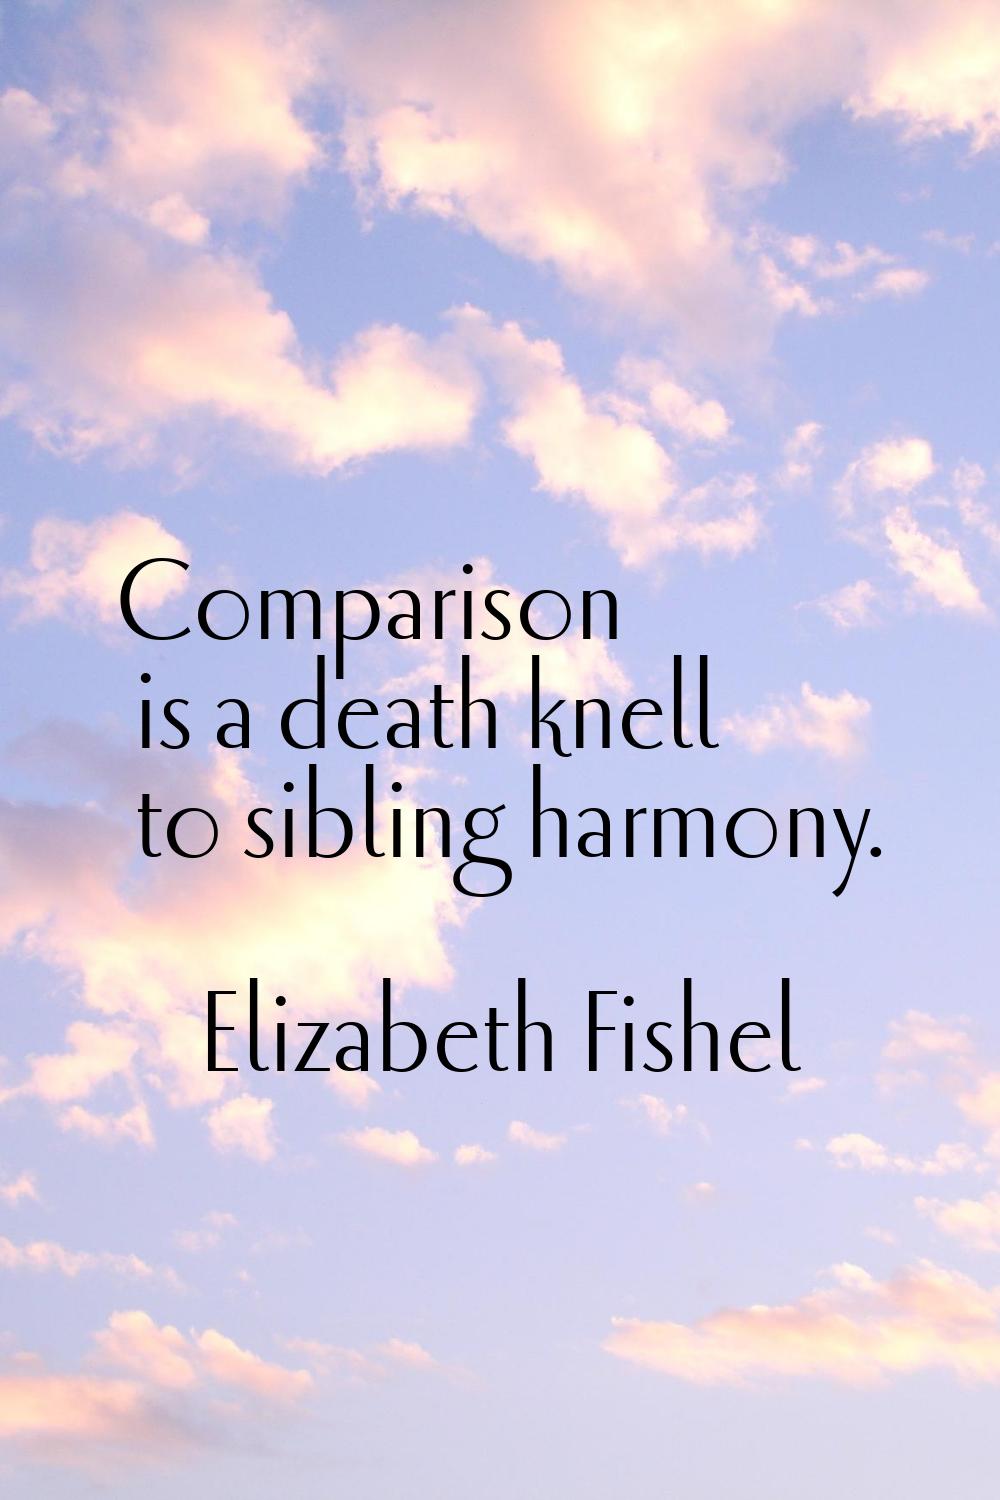 Comparison is a death knell to sibling harmony.